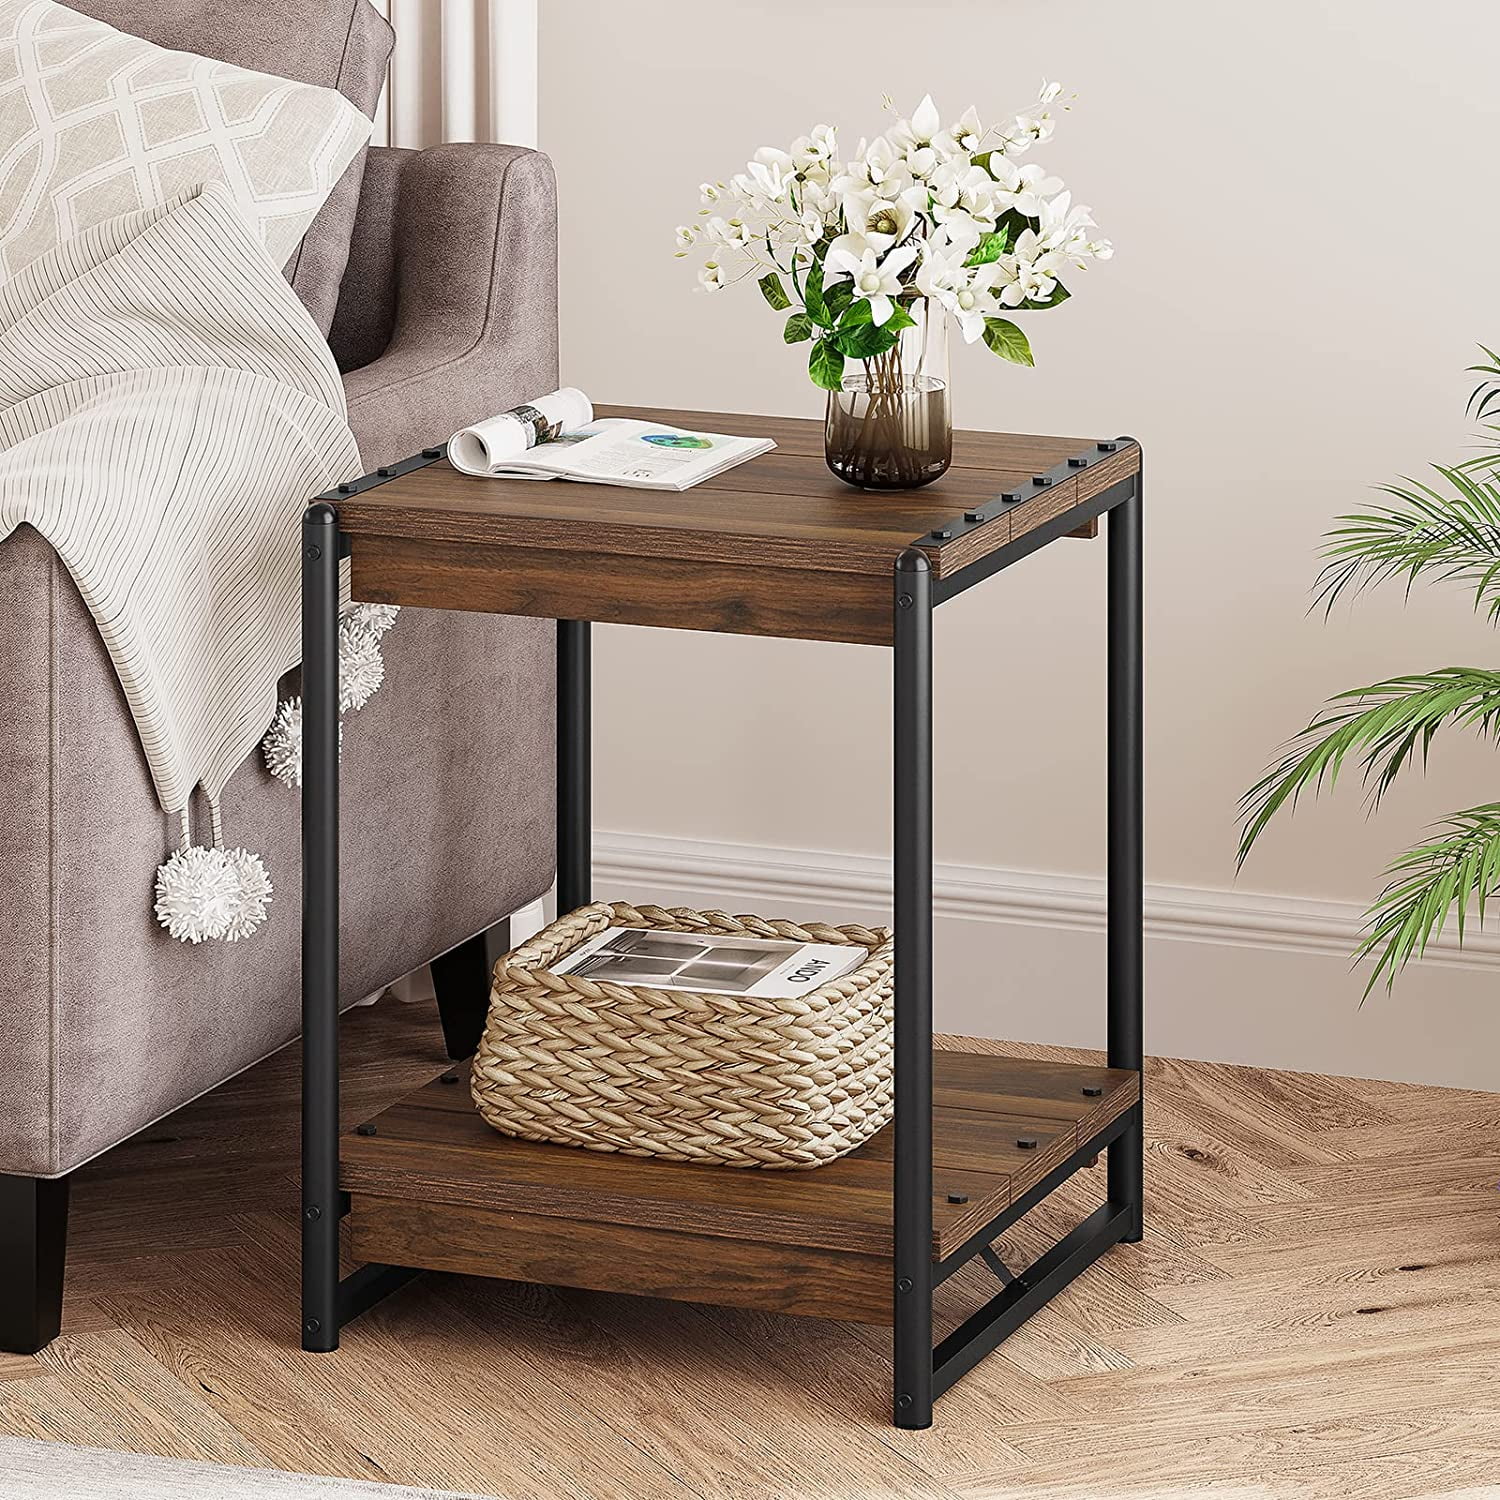 End Table With 2 Tier Shelf